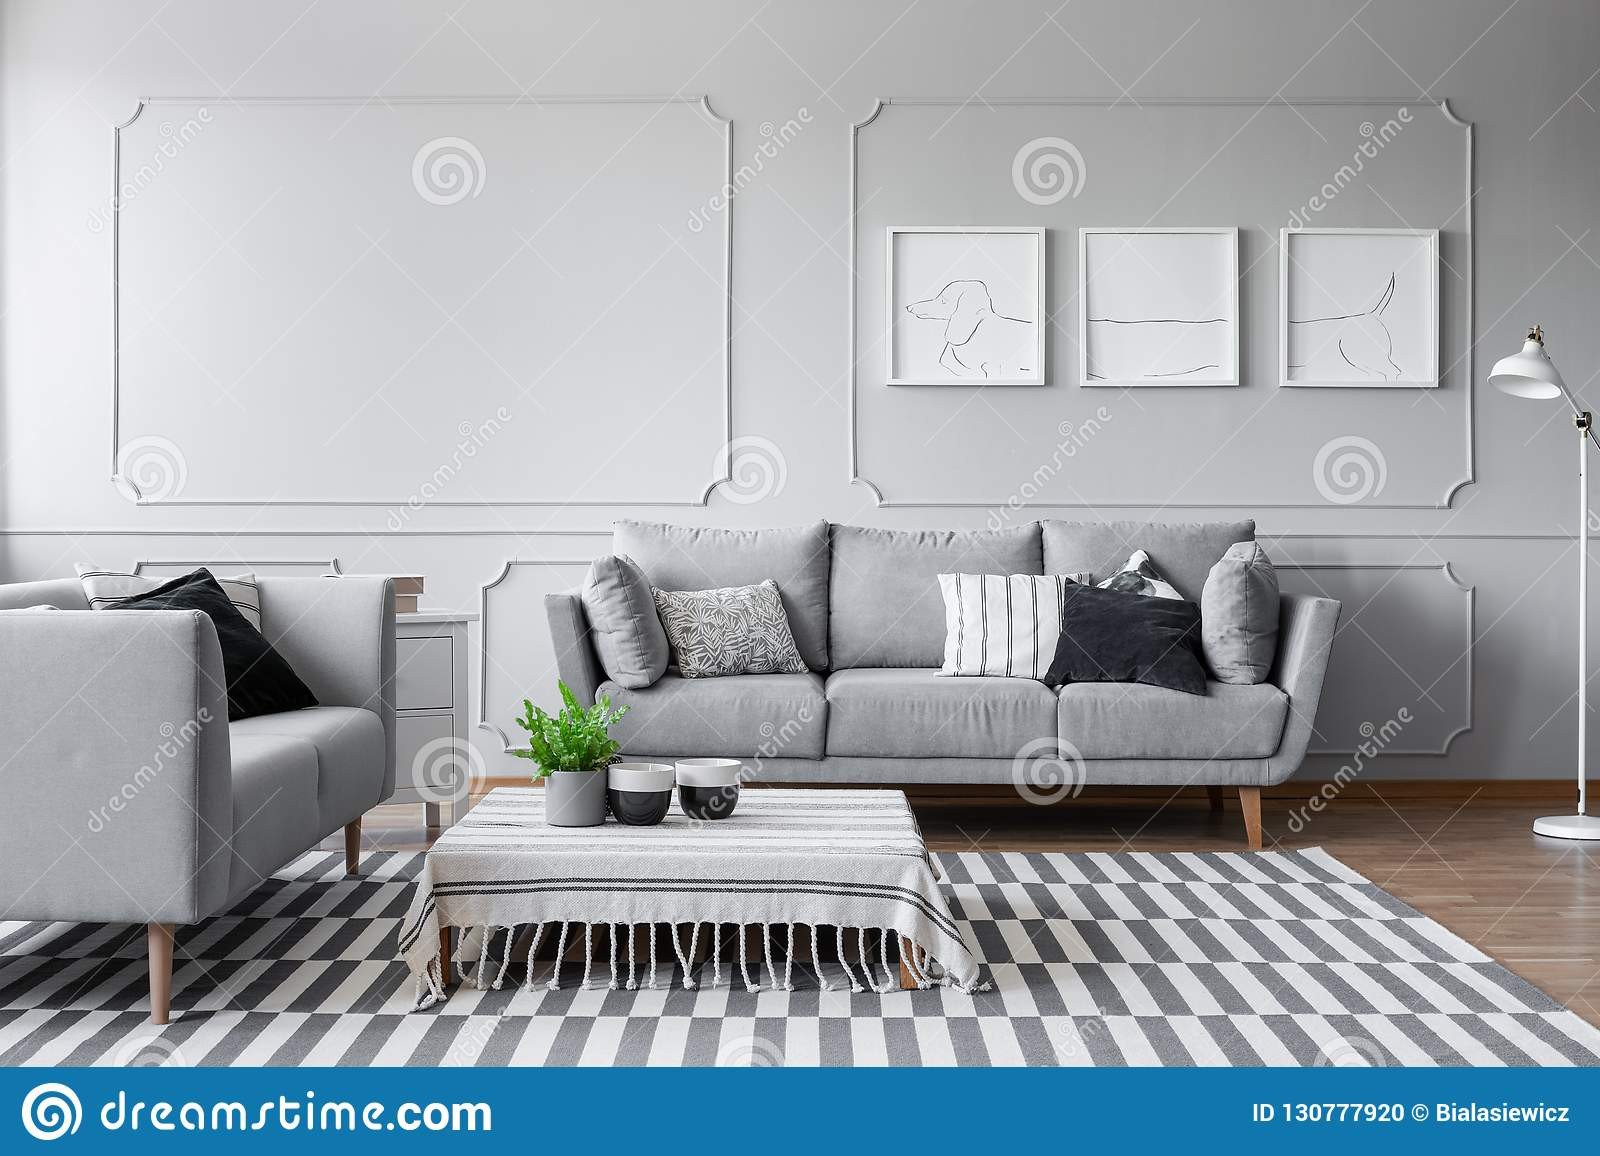 Comfortable Elegant Living Room New Elegant Living Room with Two fortable Grey sofas with Pillows and Graphic the Wall Stock